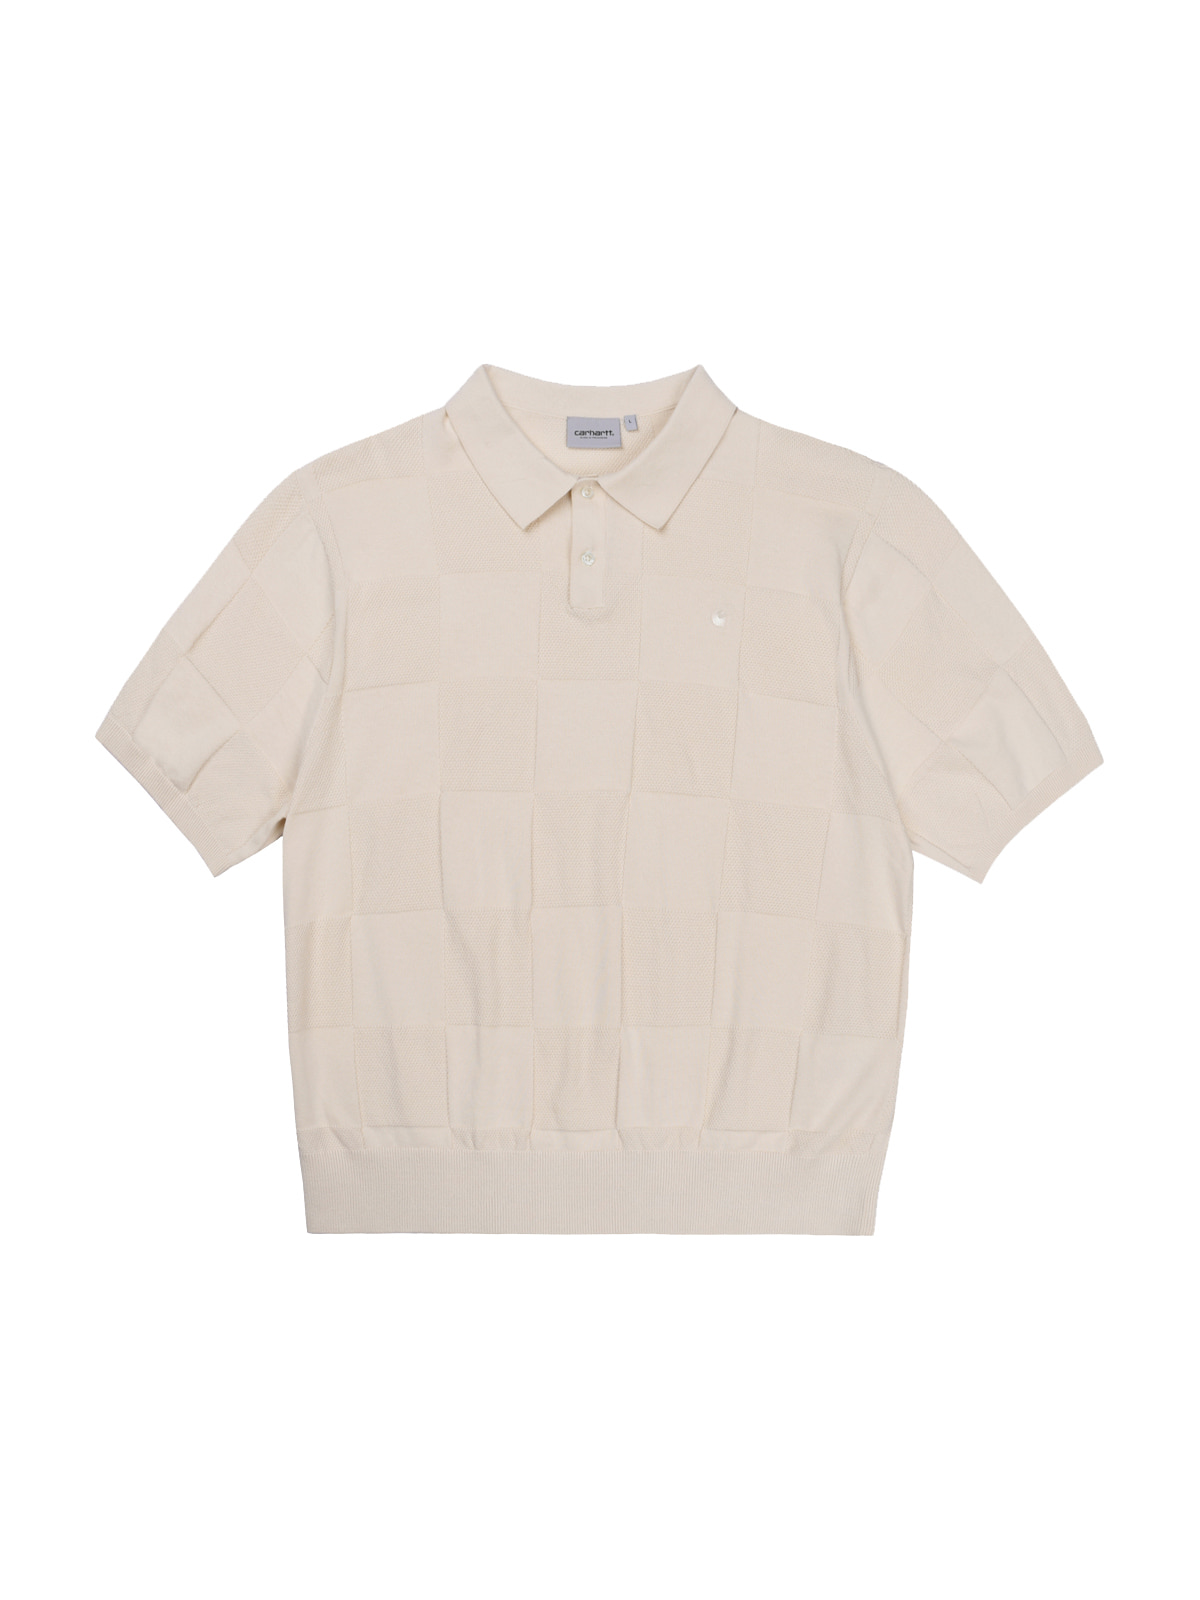 S/S PAXTON KNIT POLO WHITE SWAN